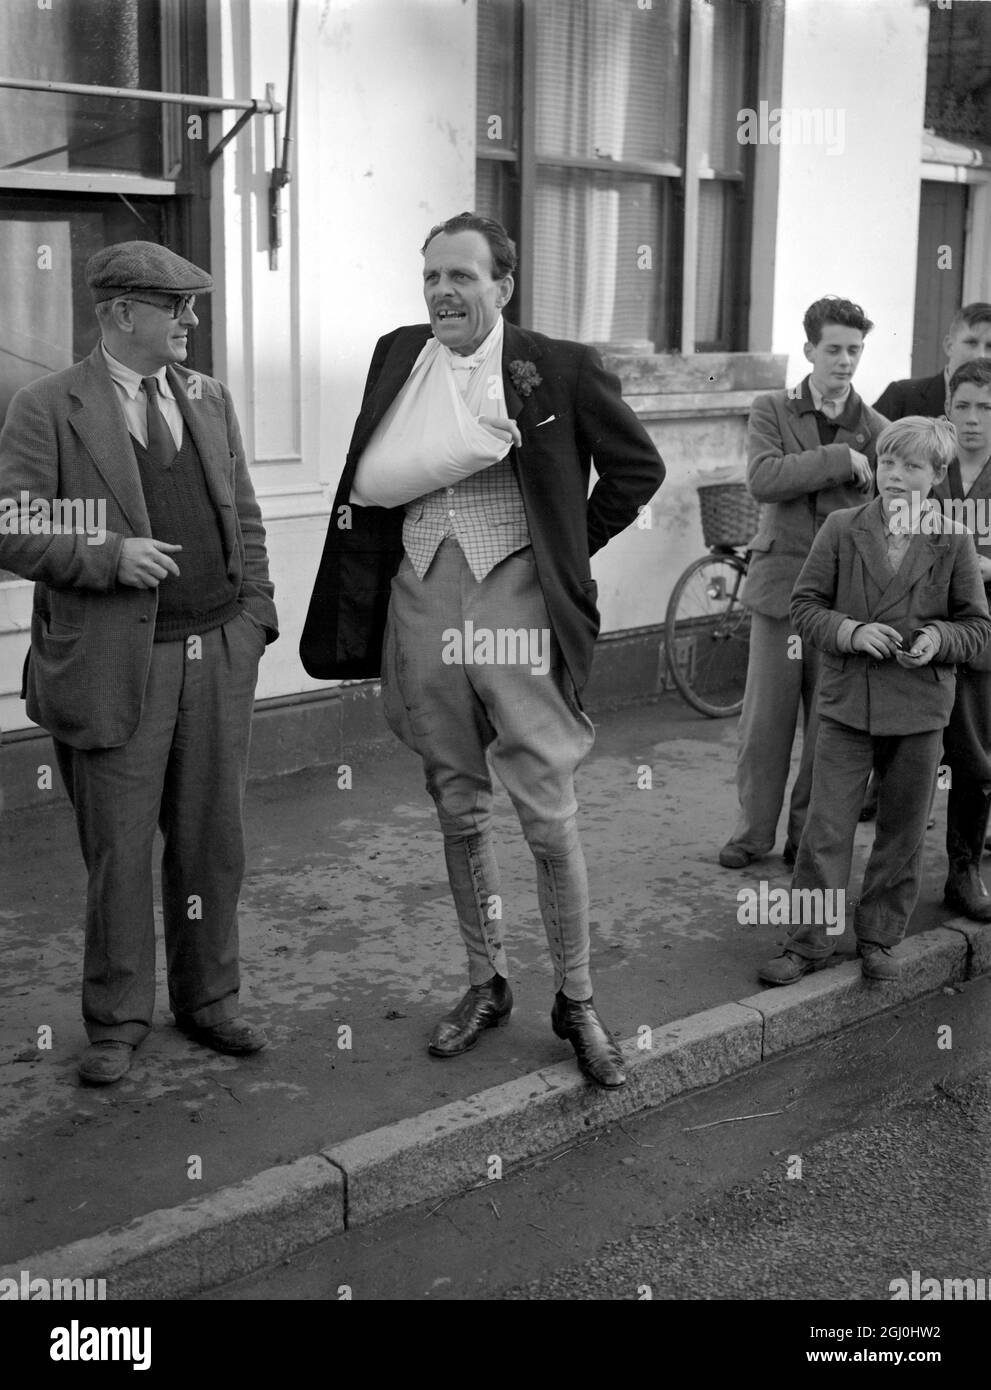 Terry Thomas the well known comedian, went hunting with the Old Surrey and Burstow Hunt, at Edenbridge, Kent. His horse was late in arriving and as soon as he was mounted he was thrown - breaking a wrist. A good sport, he is seen in the High Street after having treatment at the Edenbridge Hospital 1 December 1954 Stock Photo